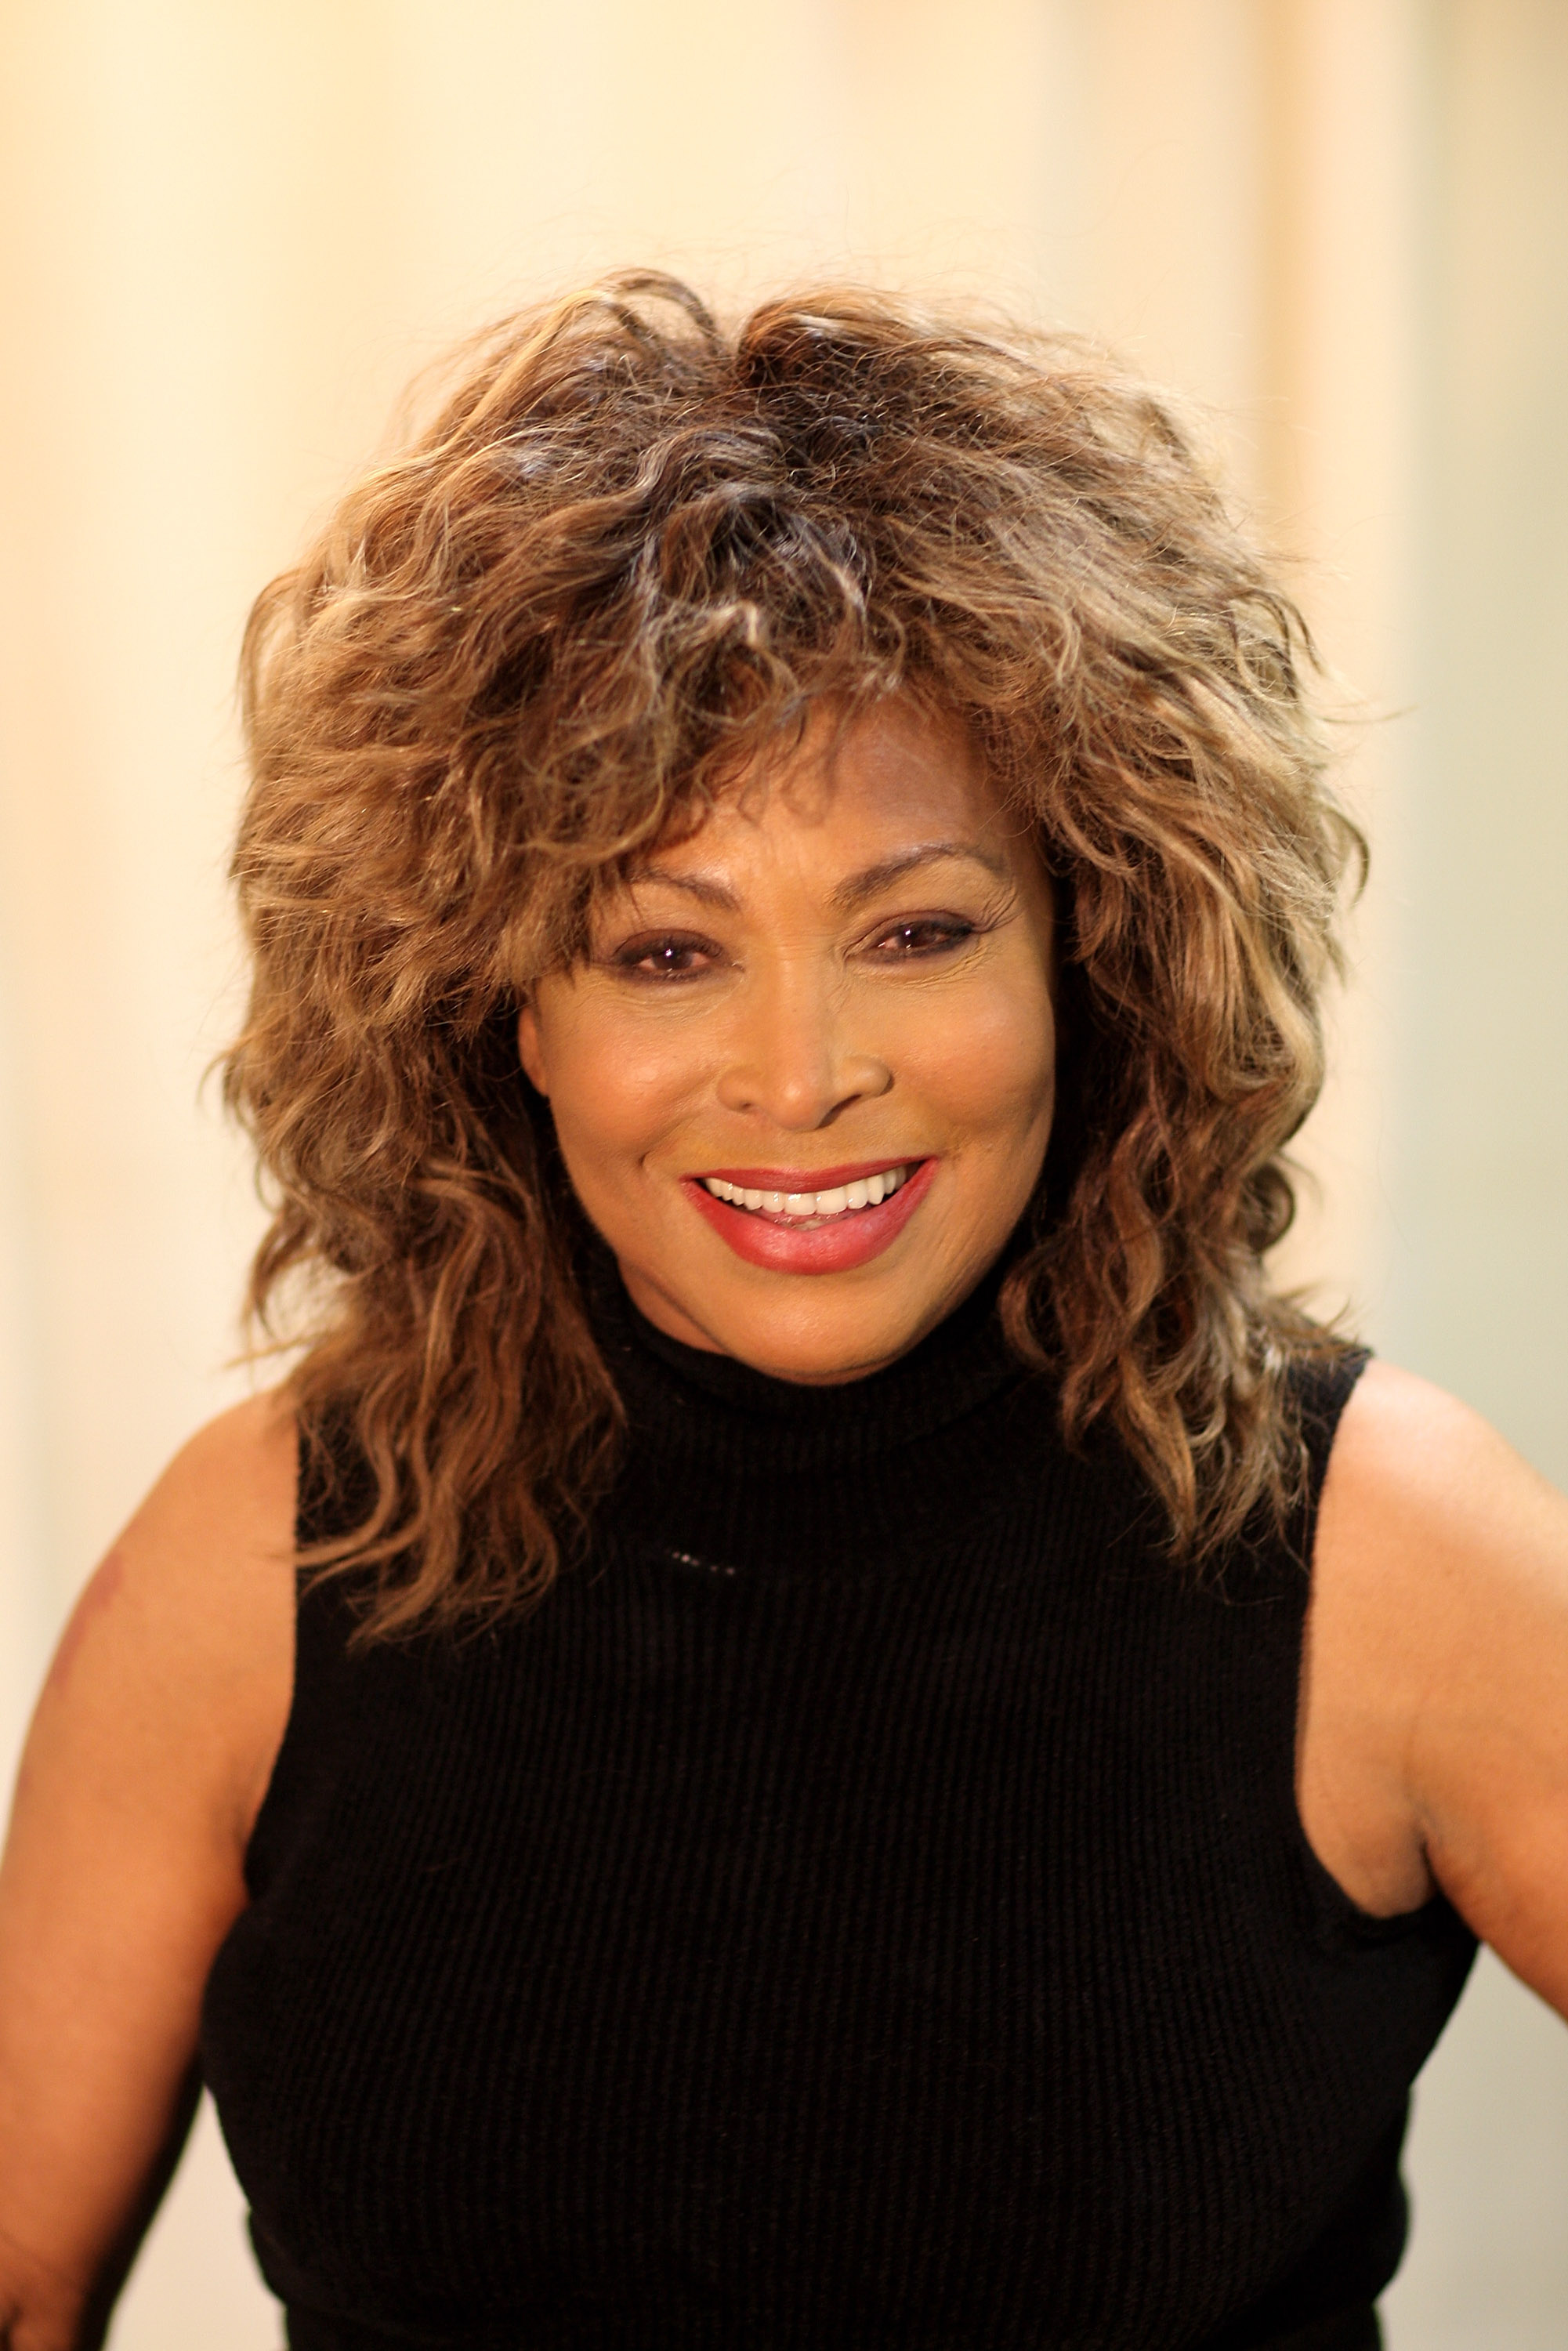 Tina Turner wallpapers, High resolution images, Quality download, Celebs, 2010x3000 HD Handy